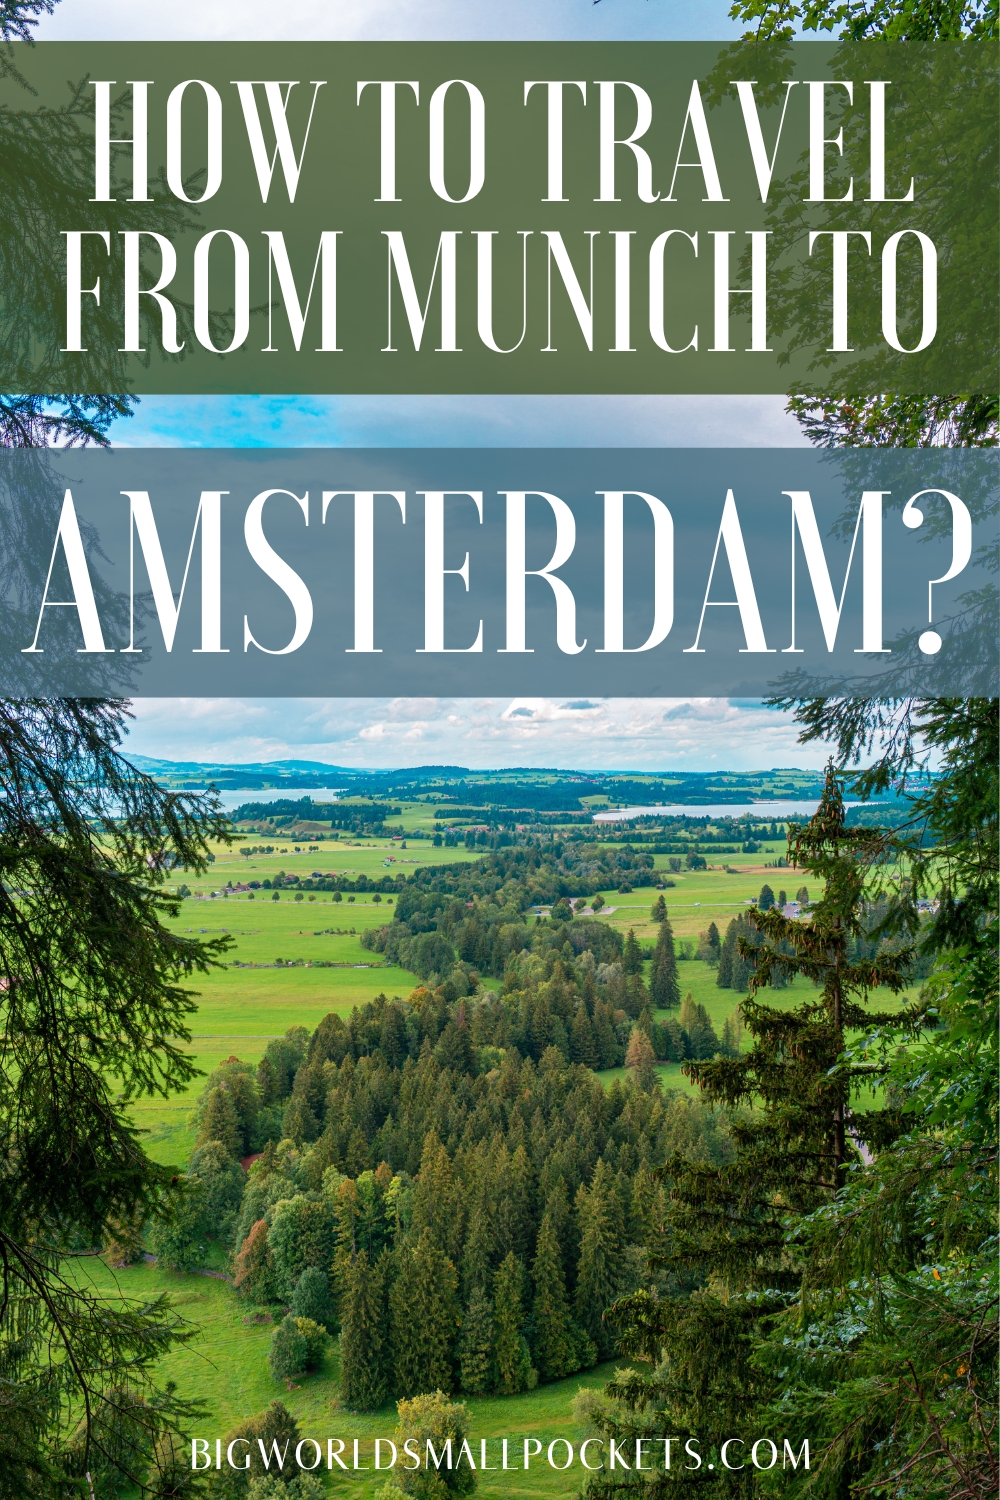 How to Travel from Munich to Amsterdam